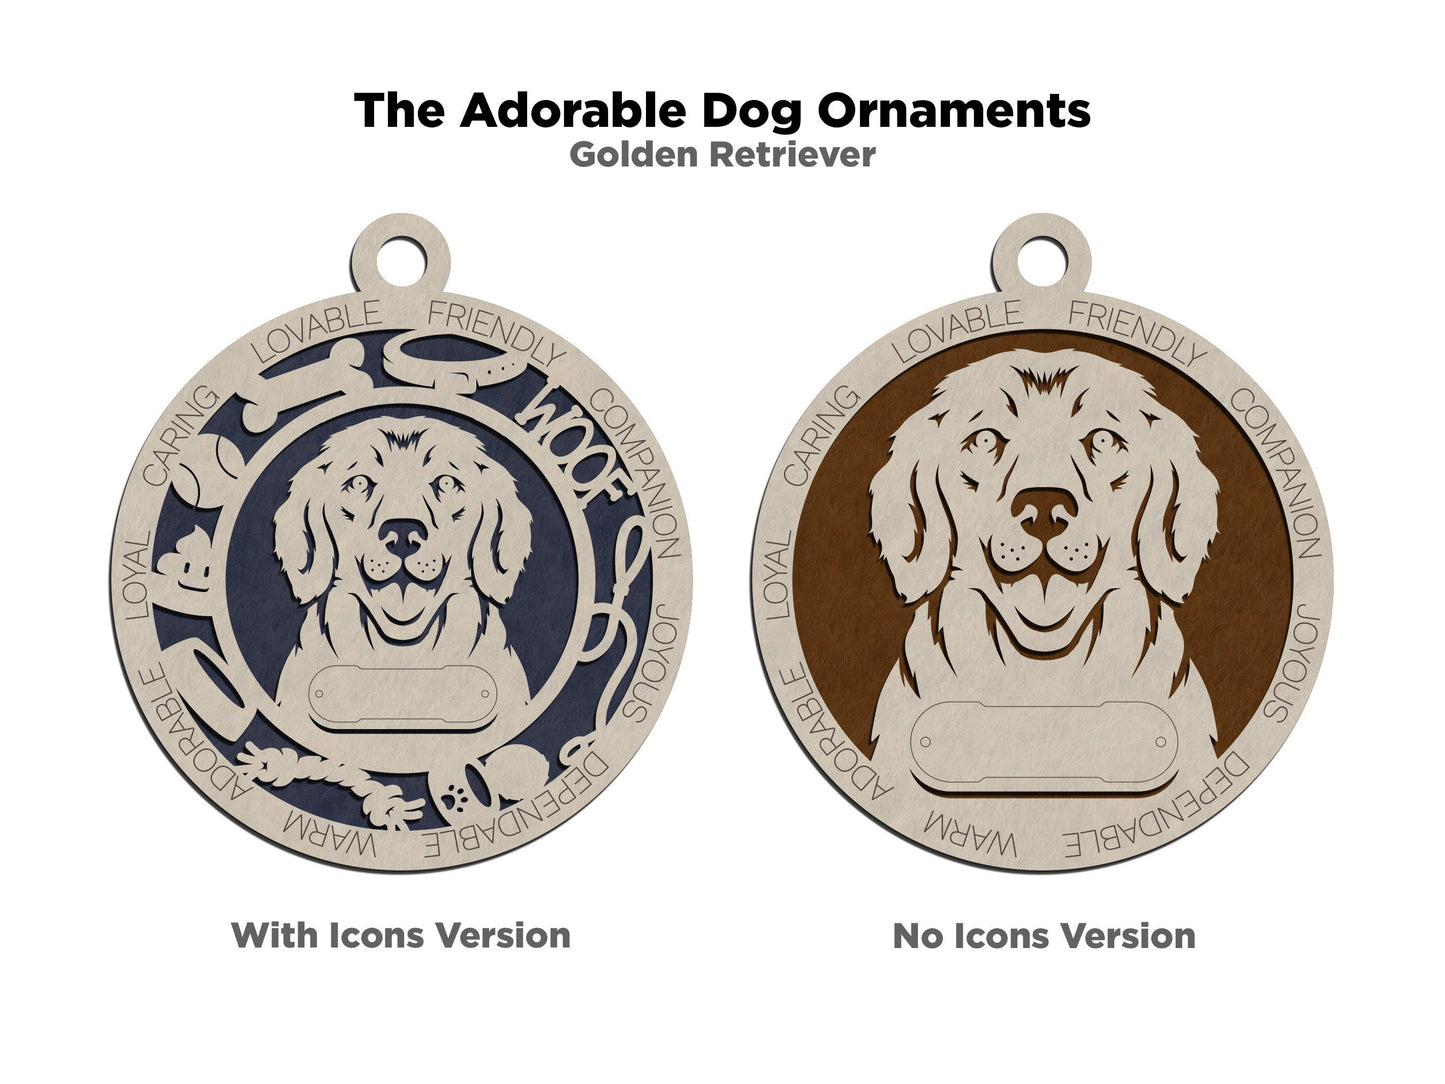 Golden Retriever - Adorable Dog Ornaments - 2 Ornaments included - SVG, PDF, AI File Download - Sized for Glowforge